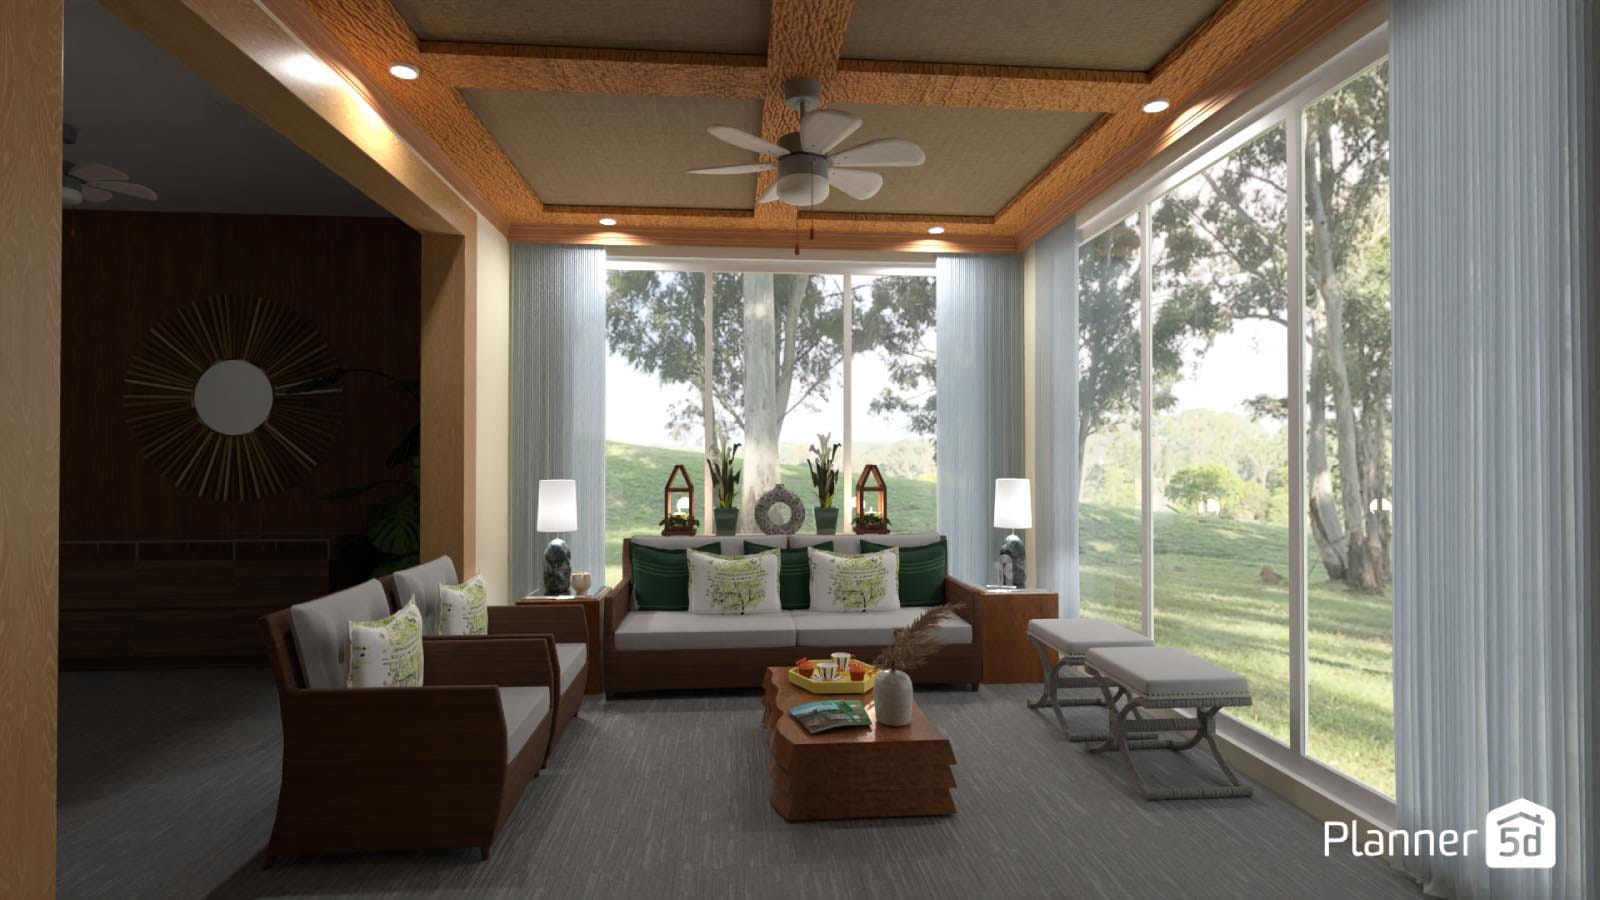 living room render created with software planner 5d